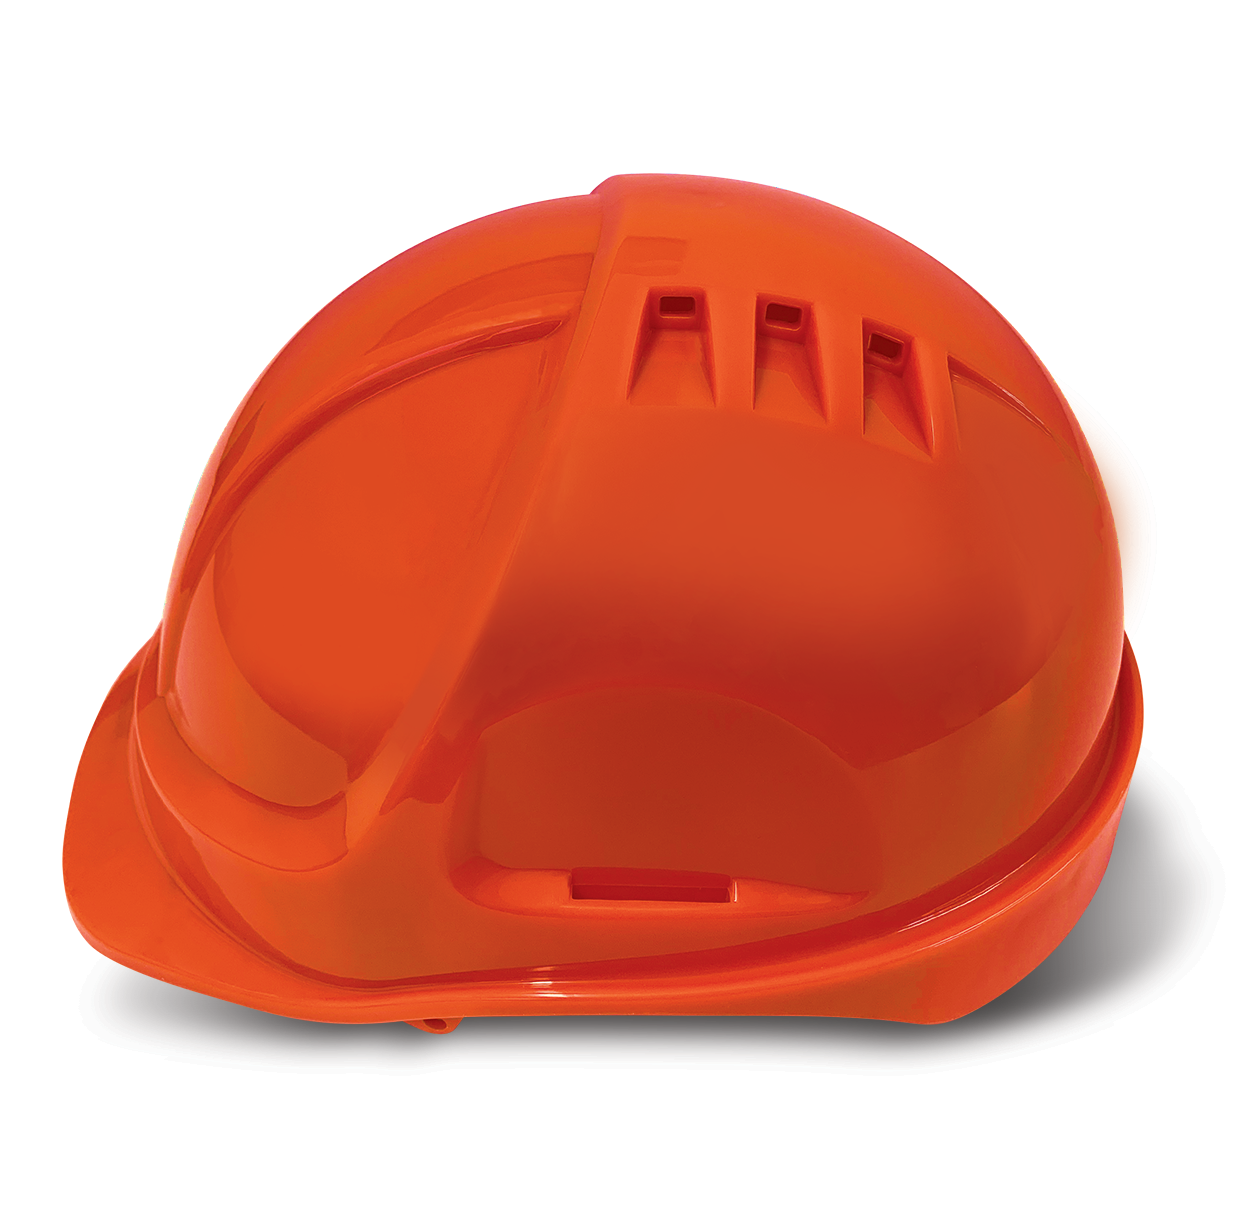 Armour Safety Products Ltd. - Armour ABS Hard Hat Vented